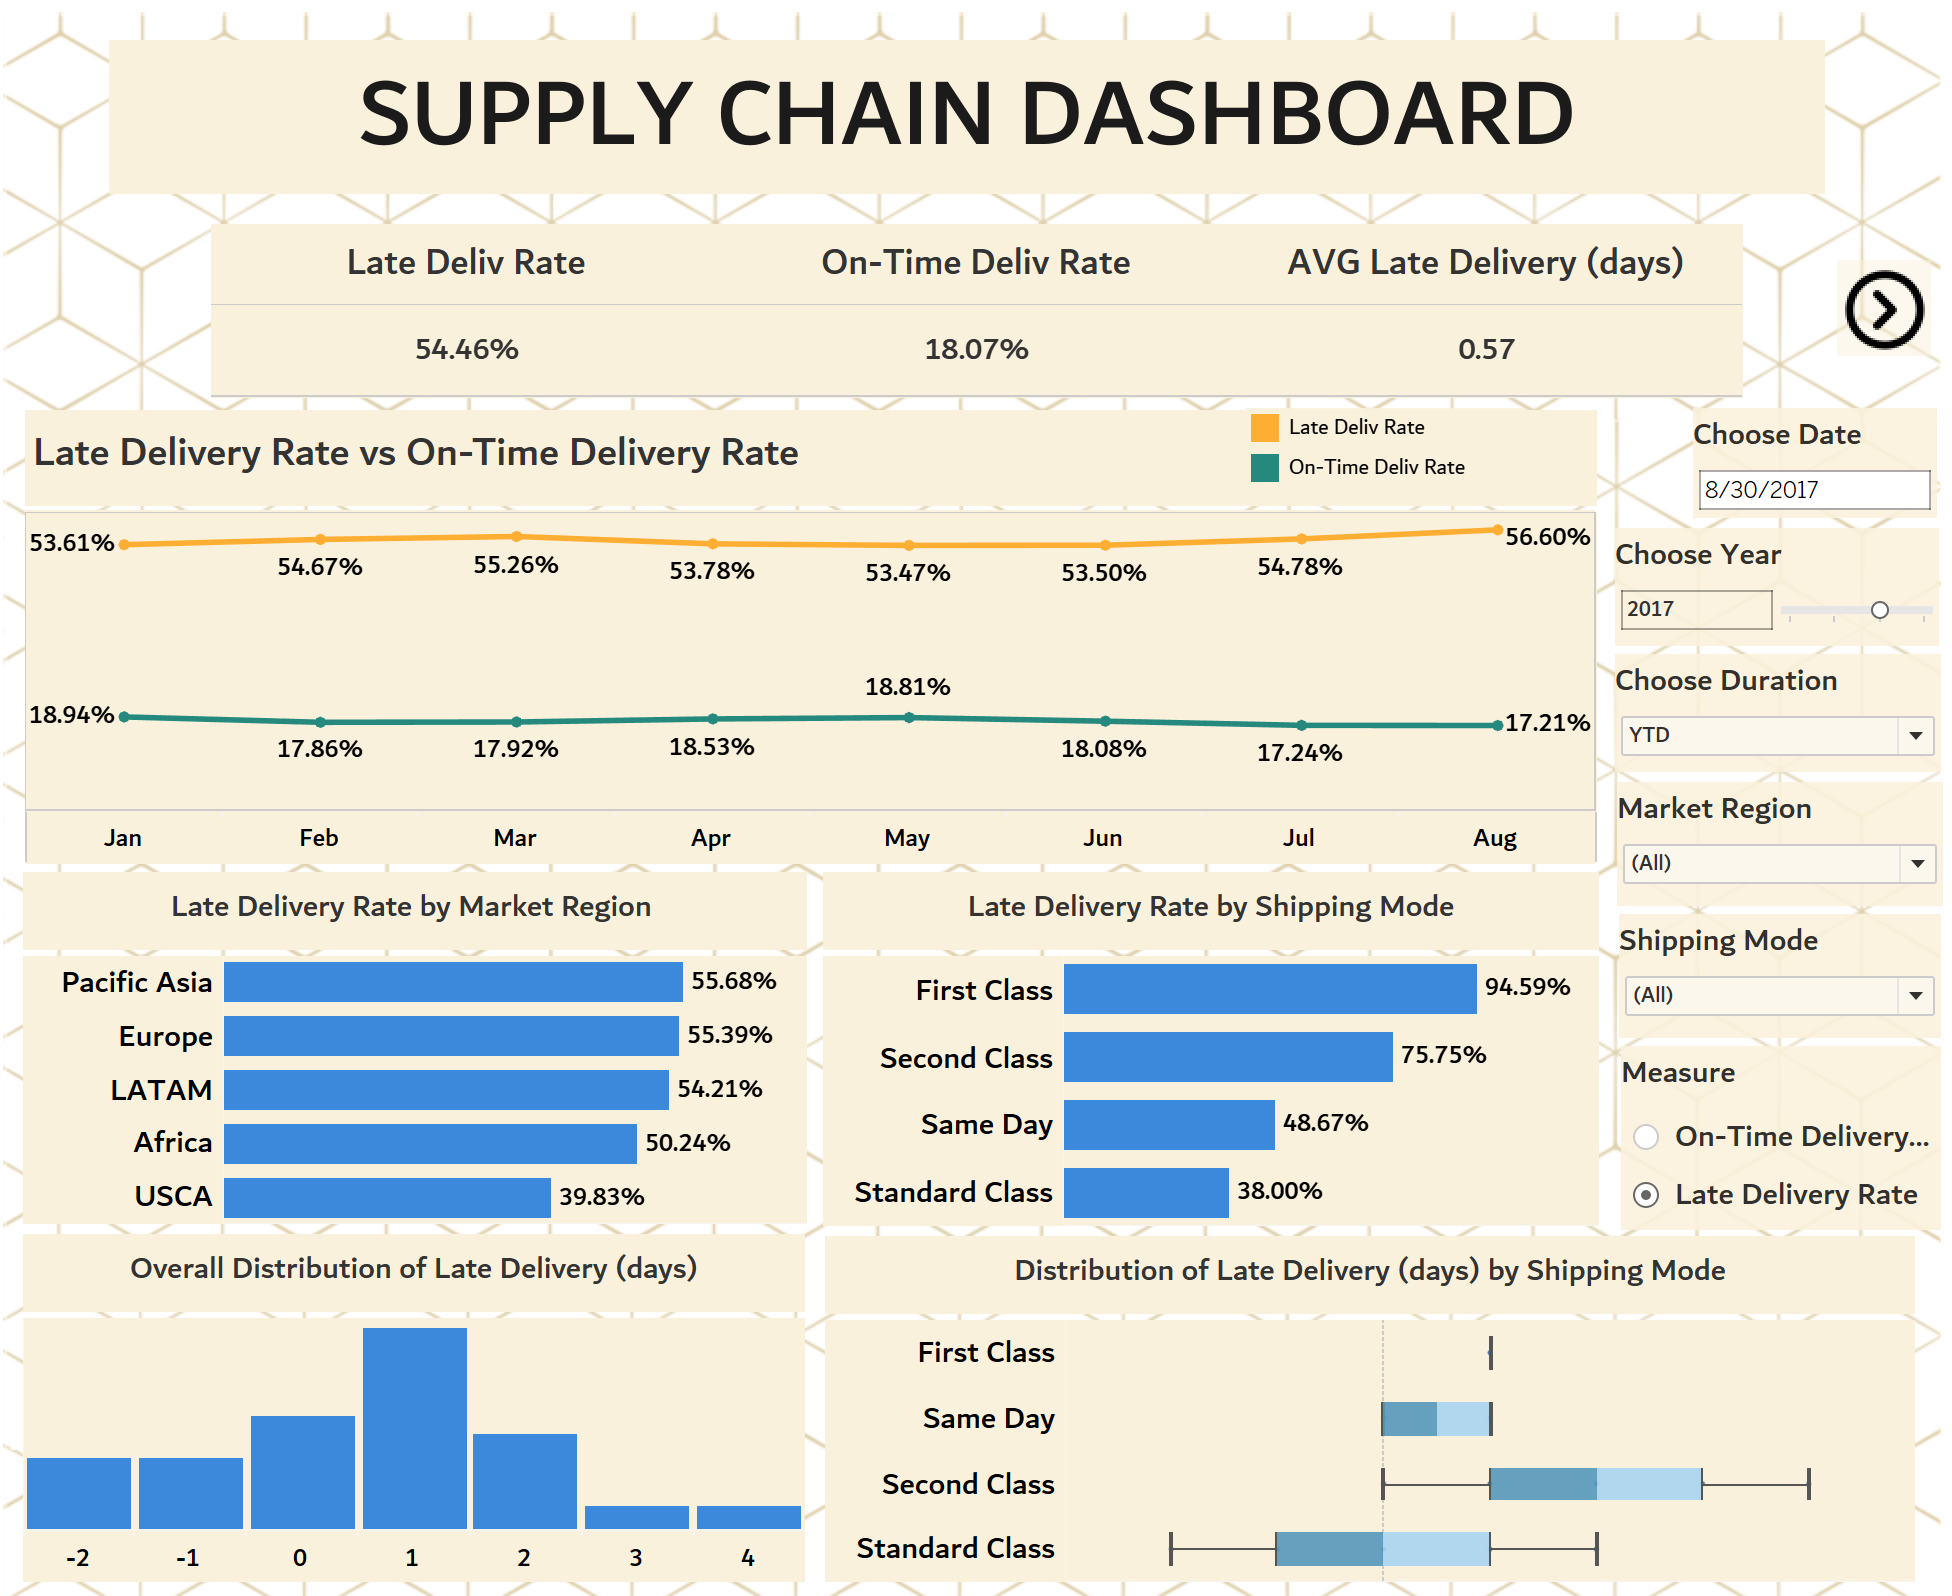 Tableau Dashboard for Nike Sales, Dashboard from Scratch